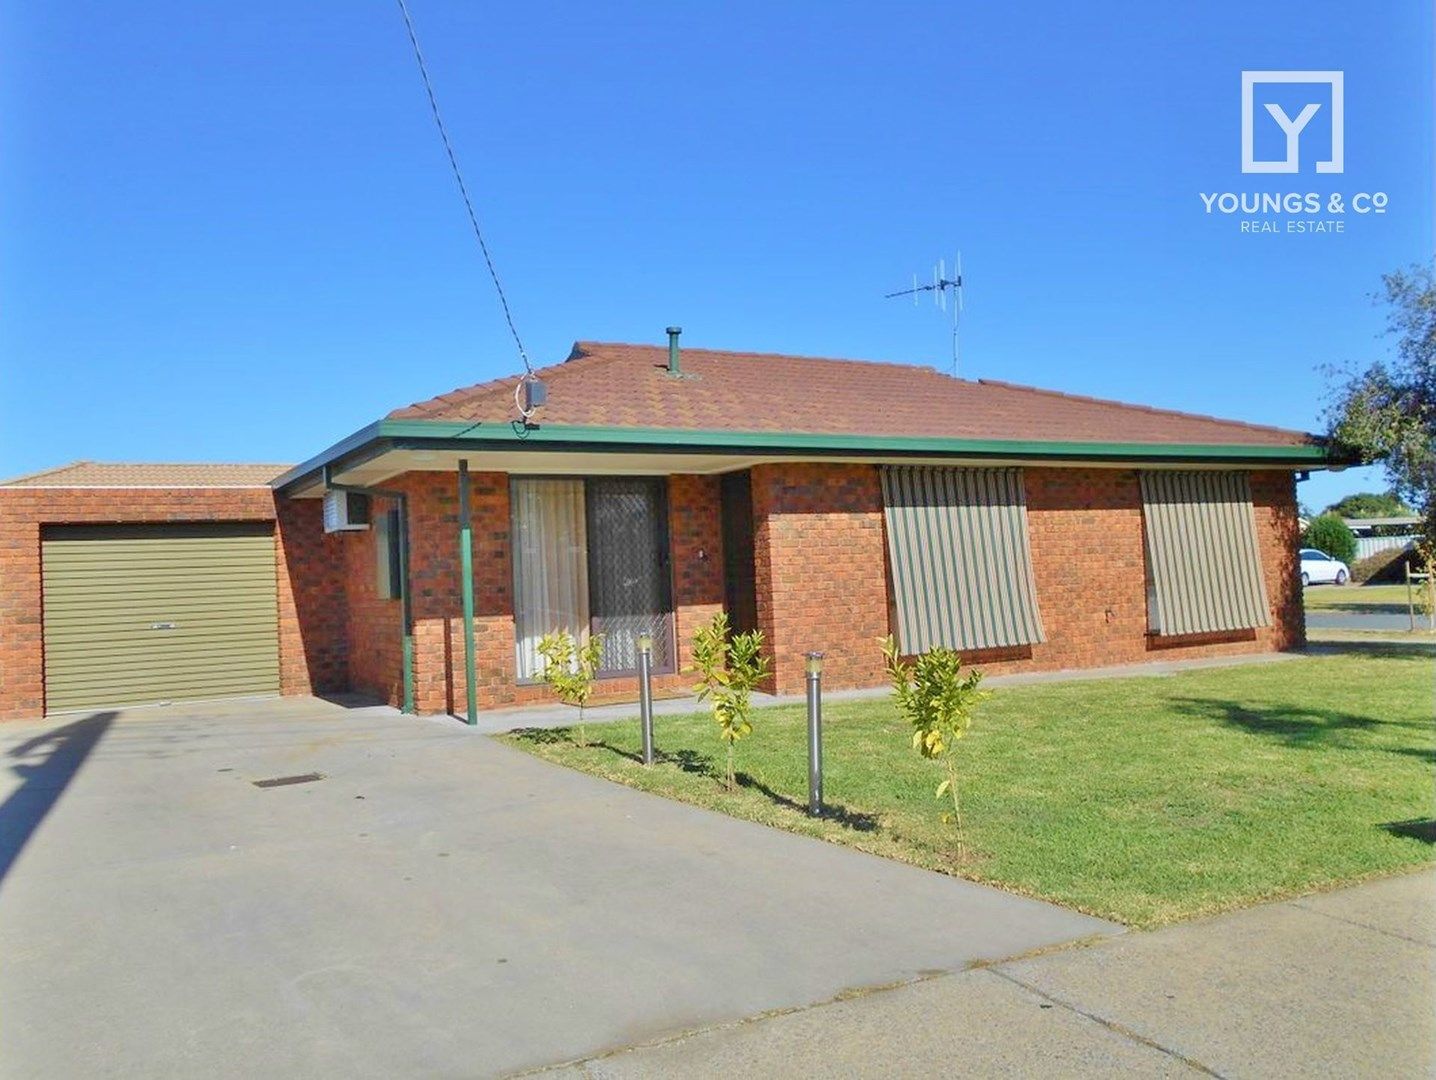 2 bedrooms House in 69 Callister St SHEPPARTON VIC, 3630